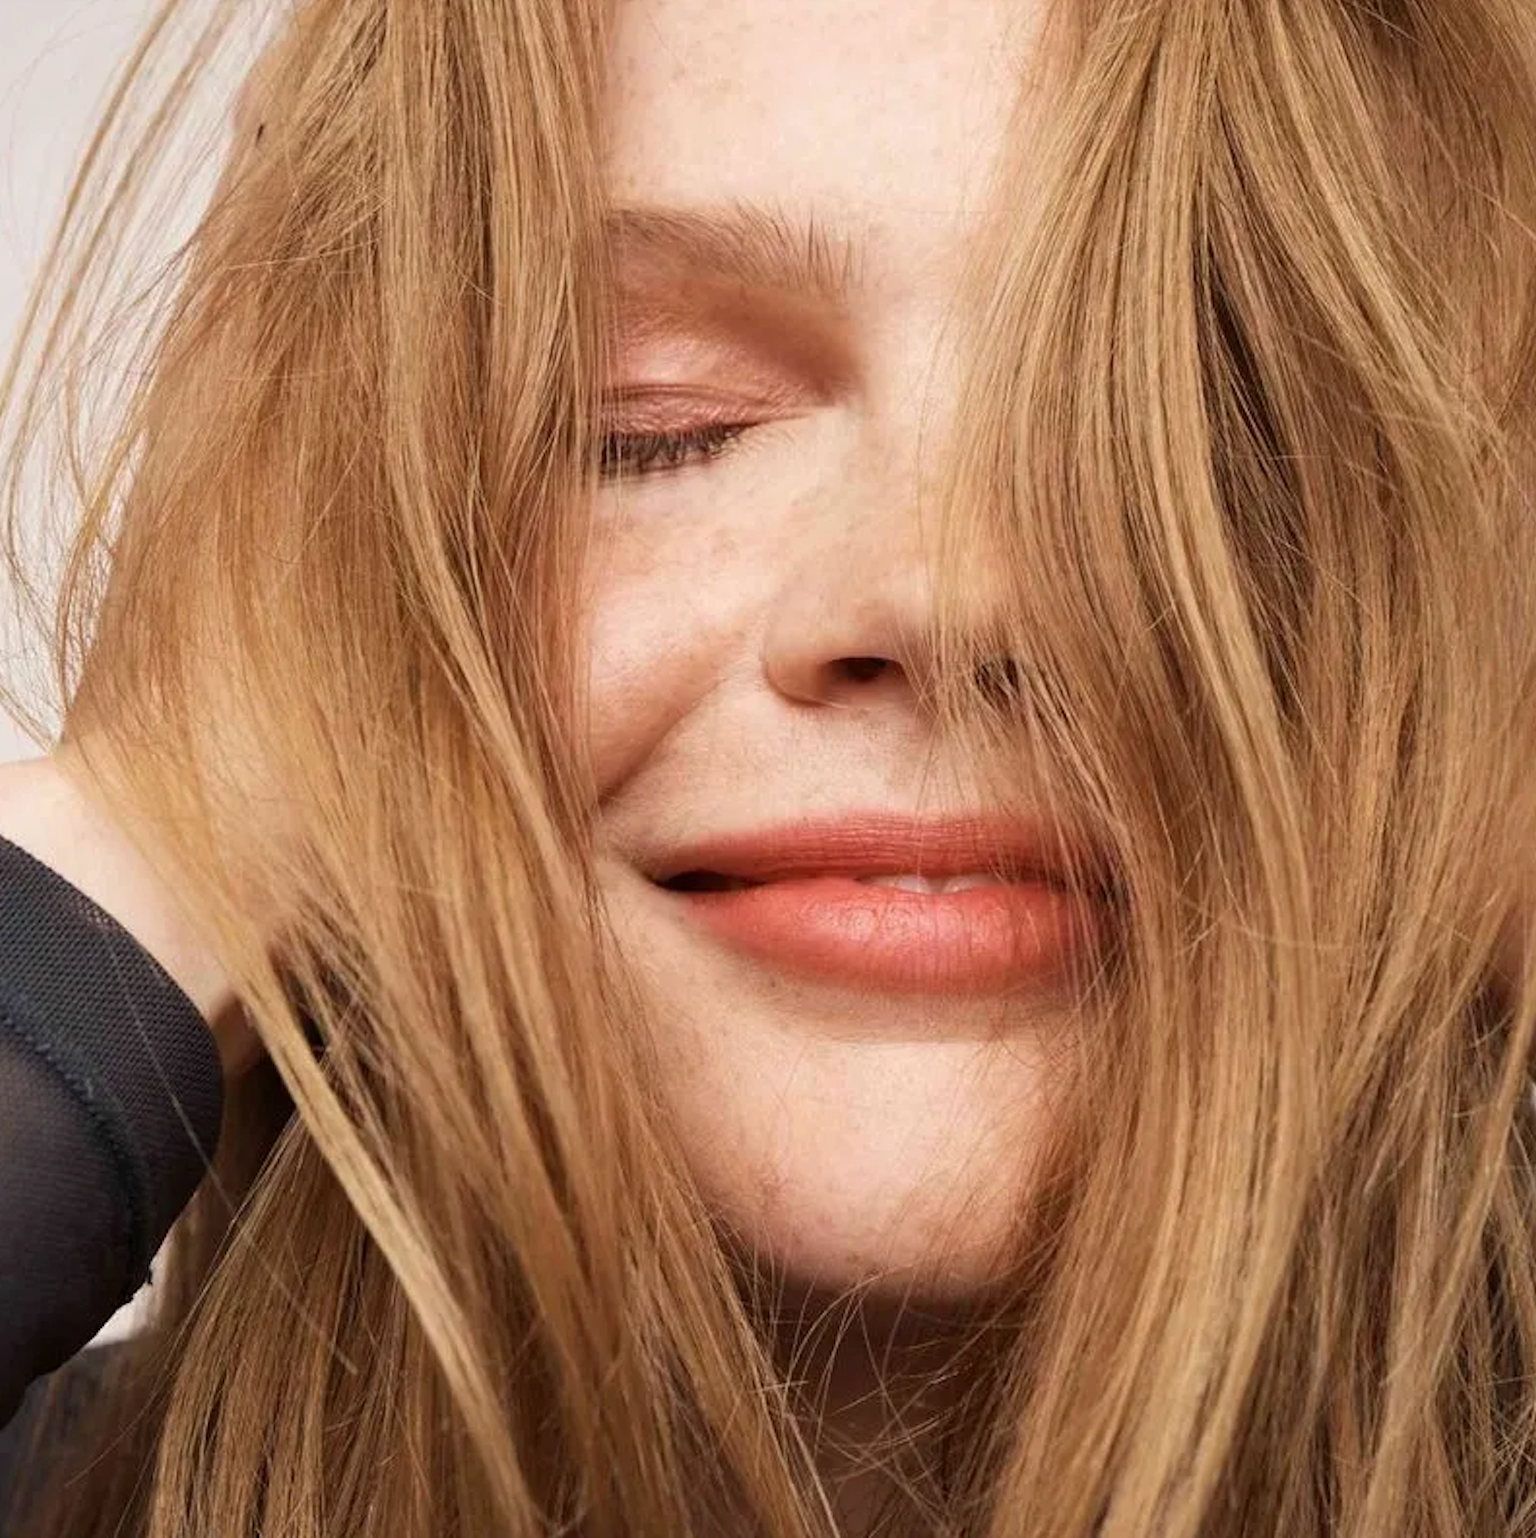 Flyaway Hairs Driving You Mad? Tame Your Locks With These Tips, Tools, and Tricks